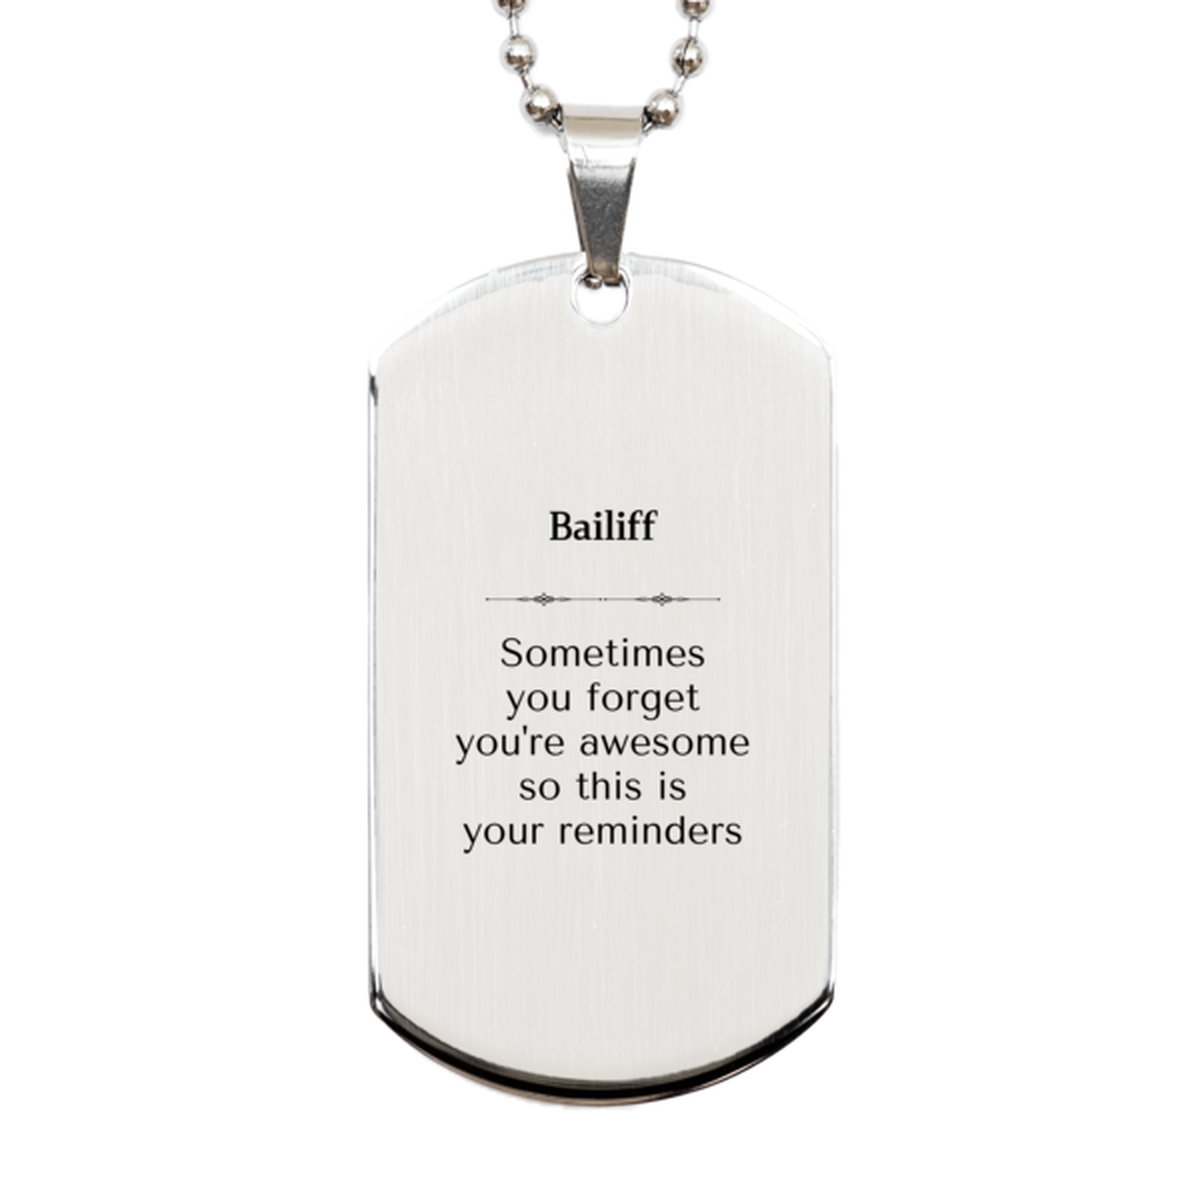 Sentimental Bailiff Silver Dog Tag, Bailiff Sometimes you forget you're awesome so this is your reminders, Graduation Christmas Birthday Gifts for Bailiff, Men, Women, Coworkers